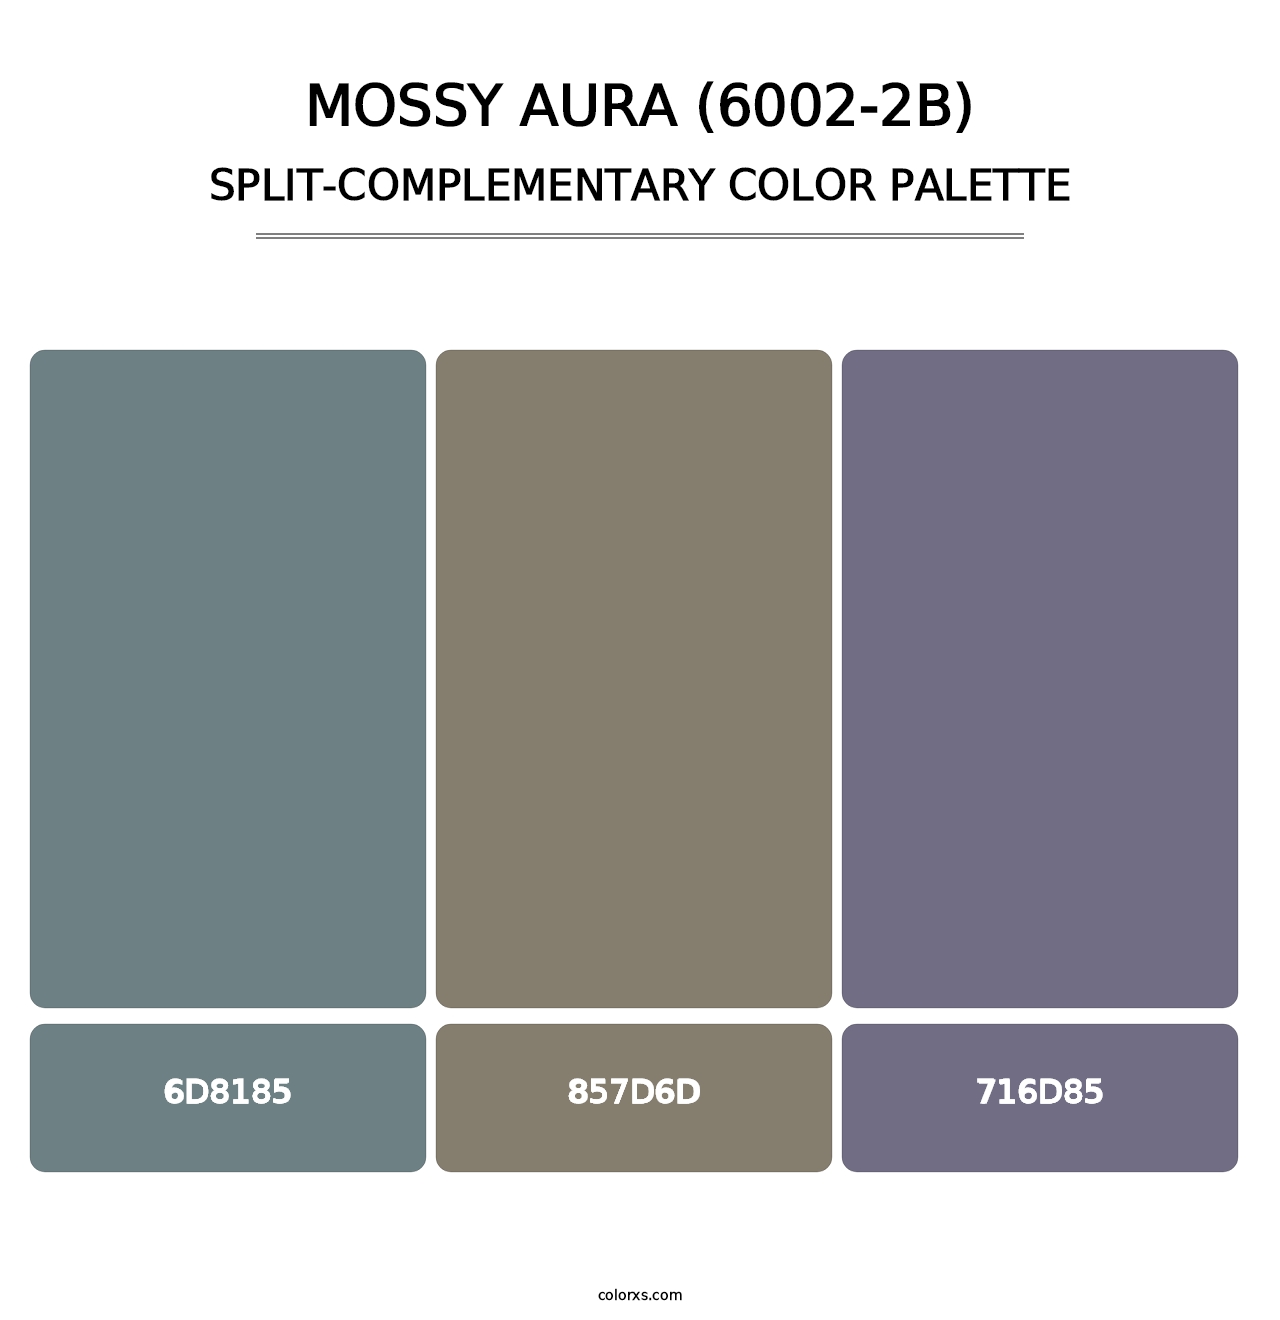 Mossy Aura (6002-2B) - Split-Complementary Color Palette